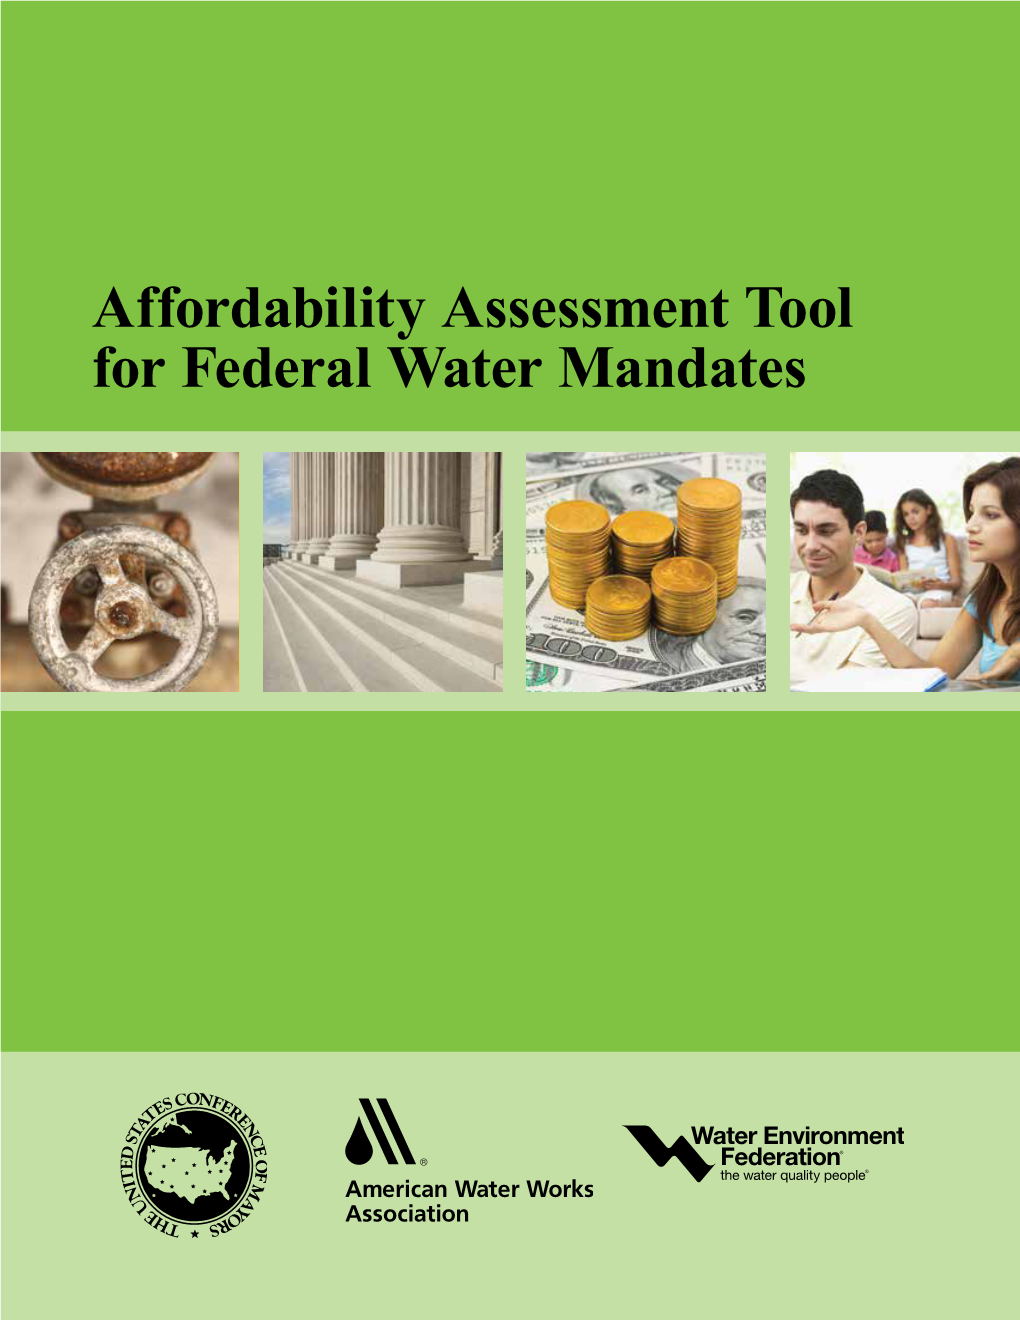 AWWA Affordability Assessment Tool for Federal Water Mandates